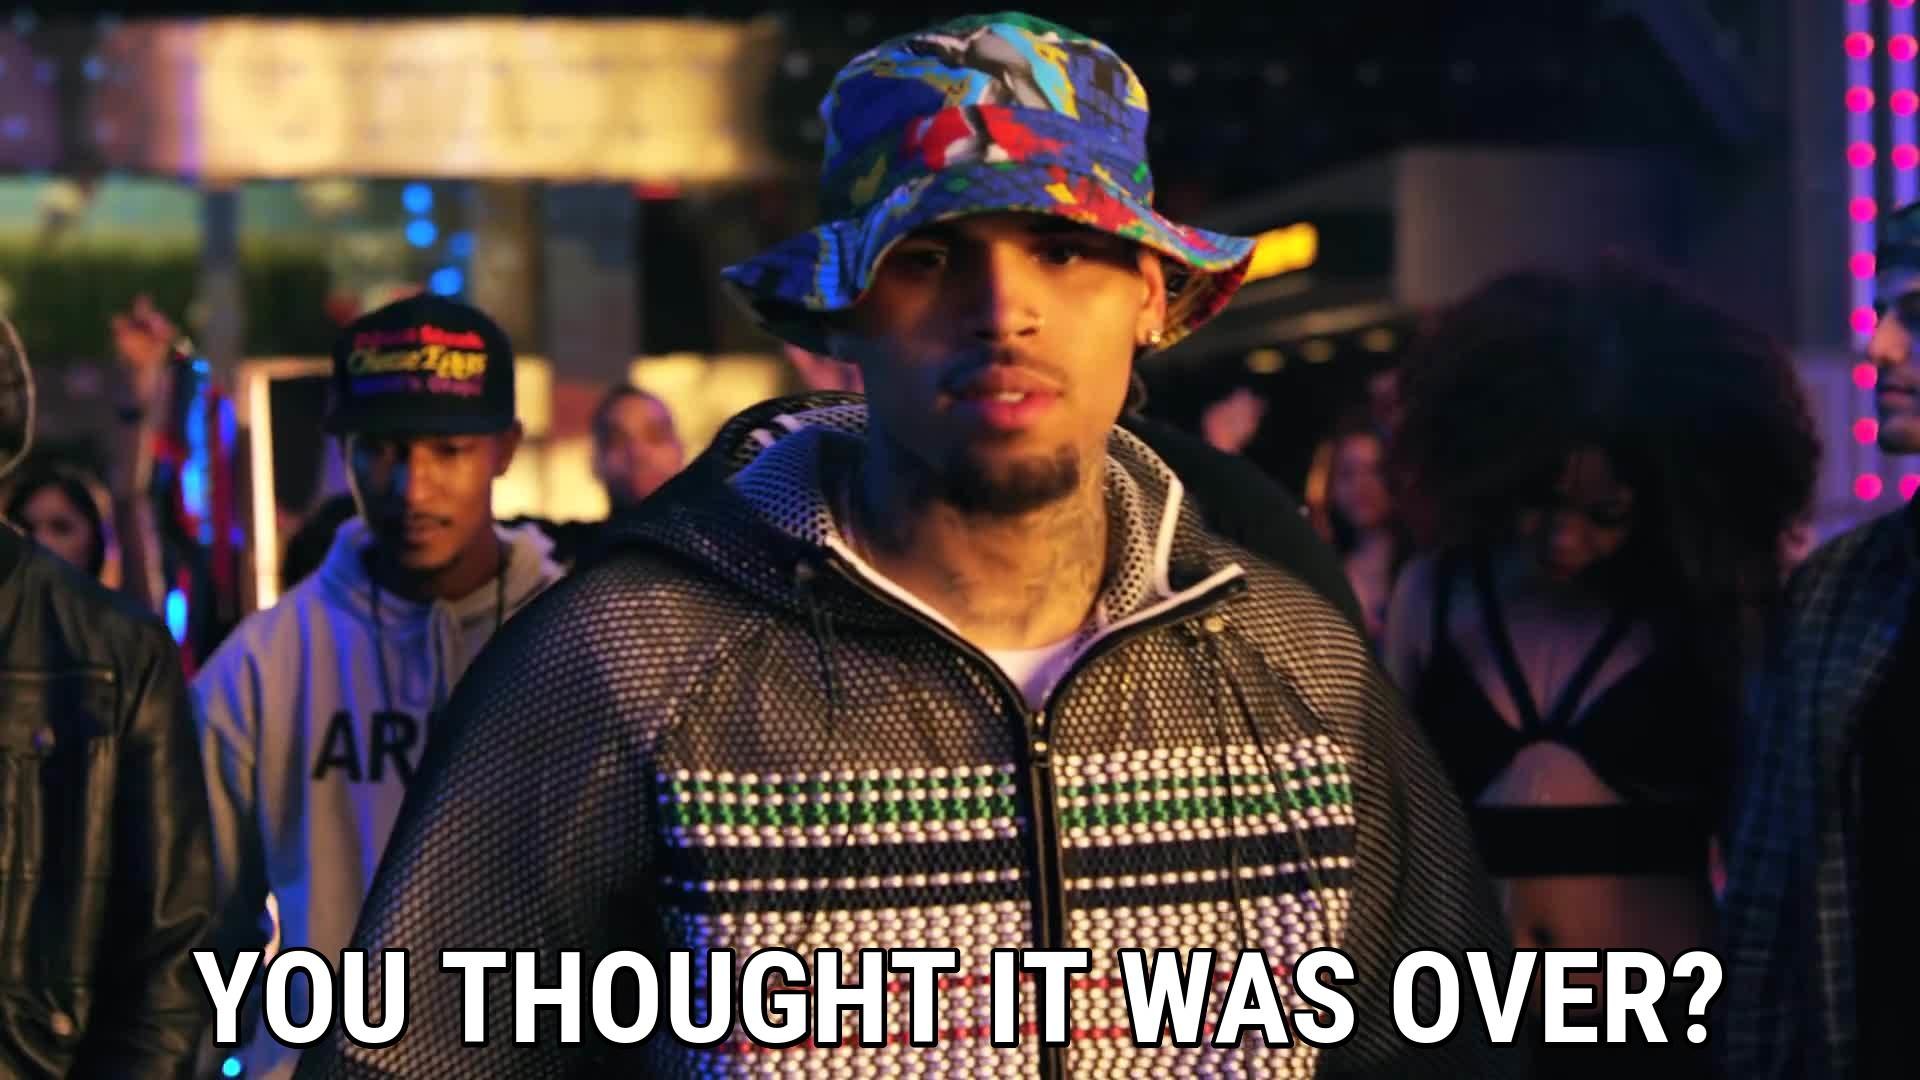 1920x1080 Chris Brown You thought it was over?